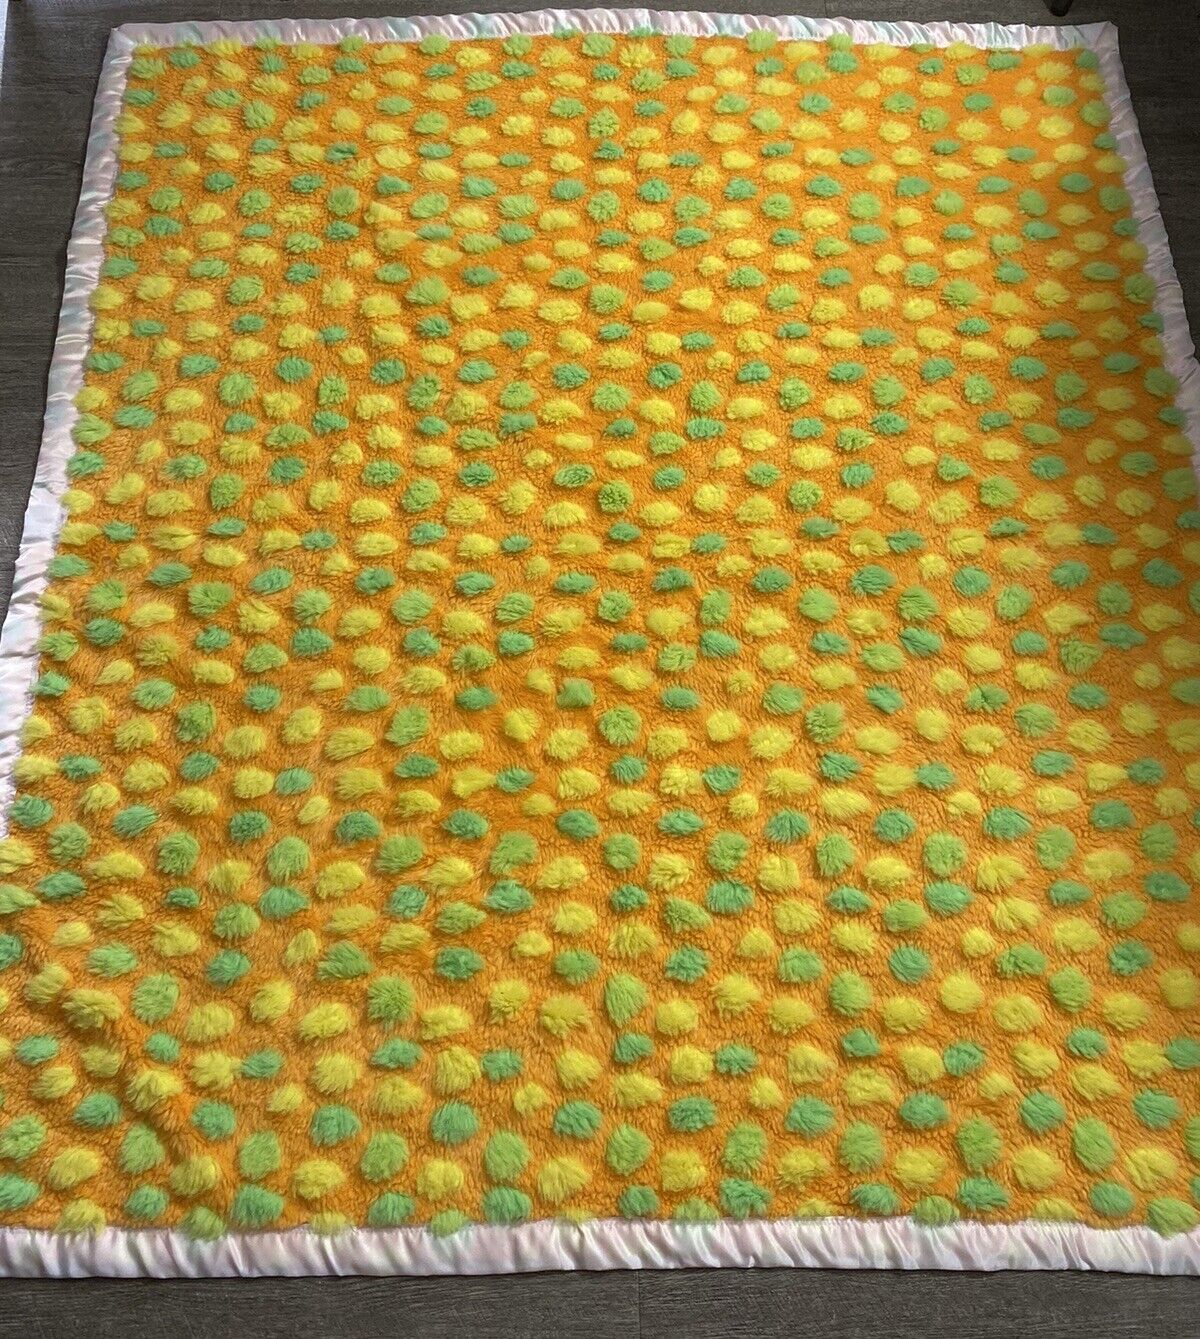 Vintage 1970’s Fuzzy Puff Blanket 65x60” Large Throw Great Colors Nylon Trim